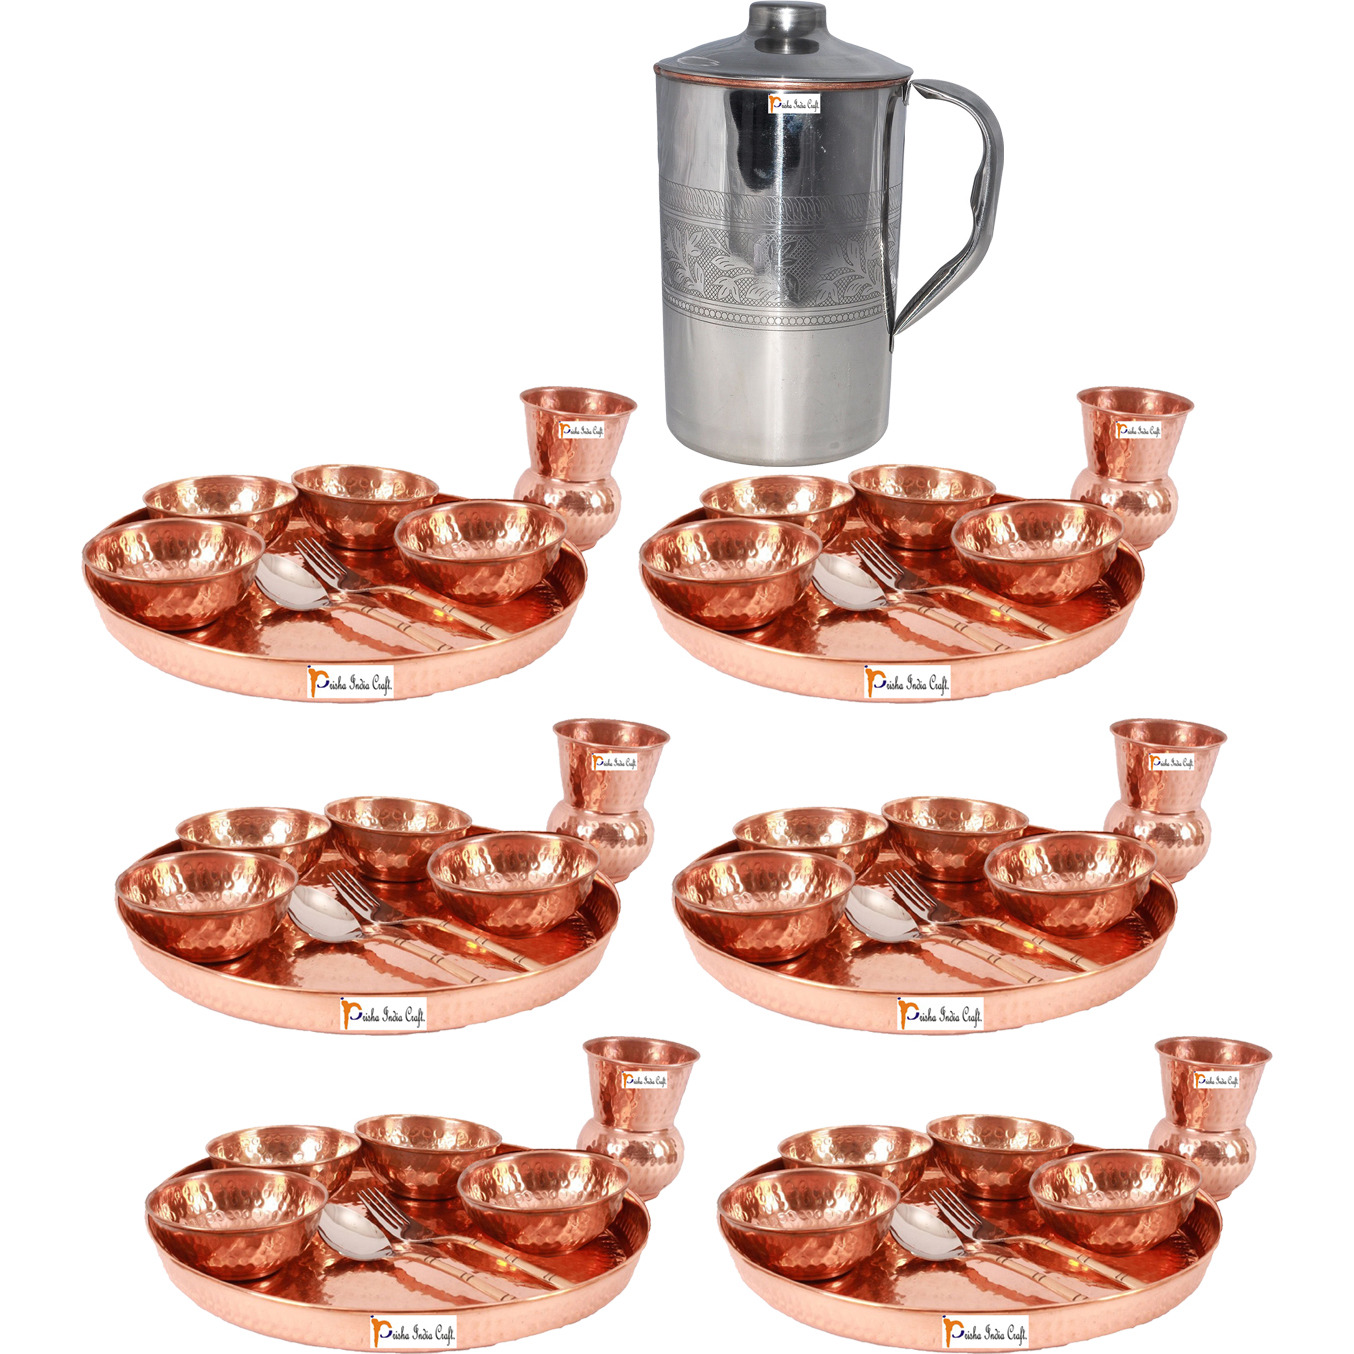 Prisha India Craft B. Set of 6 Dinnerware Traditional 100% Pure Copper Dinner Set of Thali Plate, Bowls, Glass and Spoon, Dia 12  With 1 Embossed Stainless Steel Copper Pitcher Jug - Christmas Gift